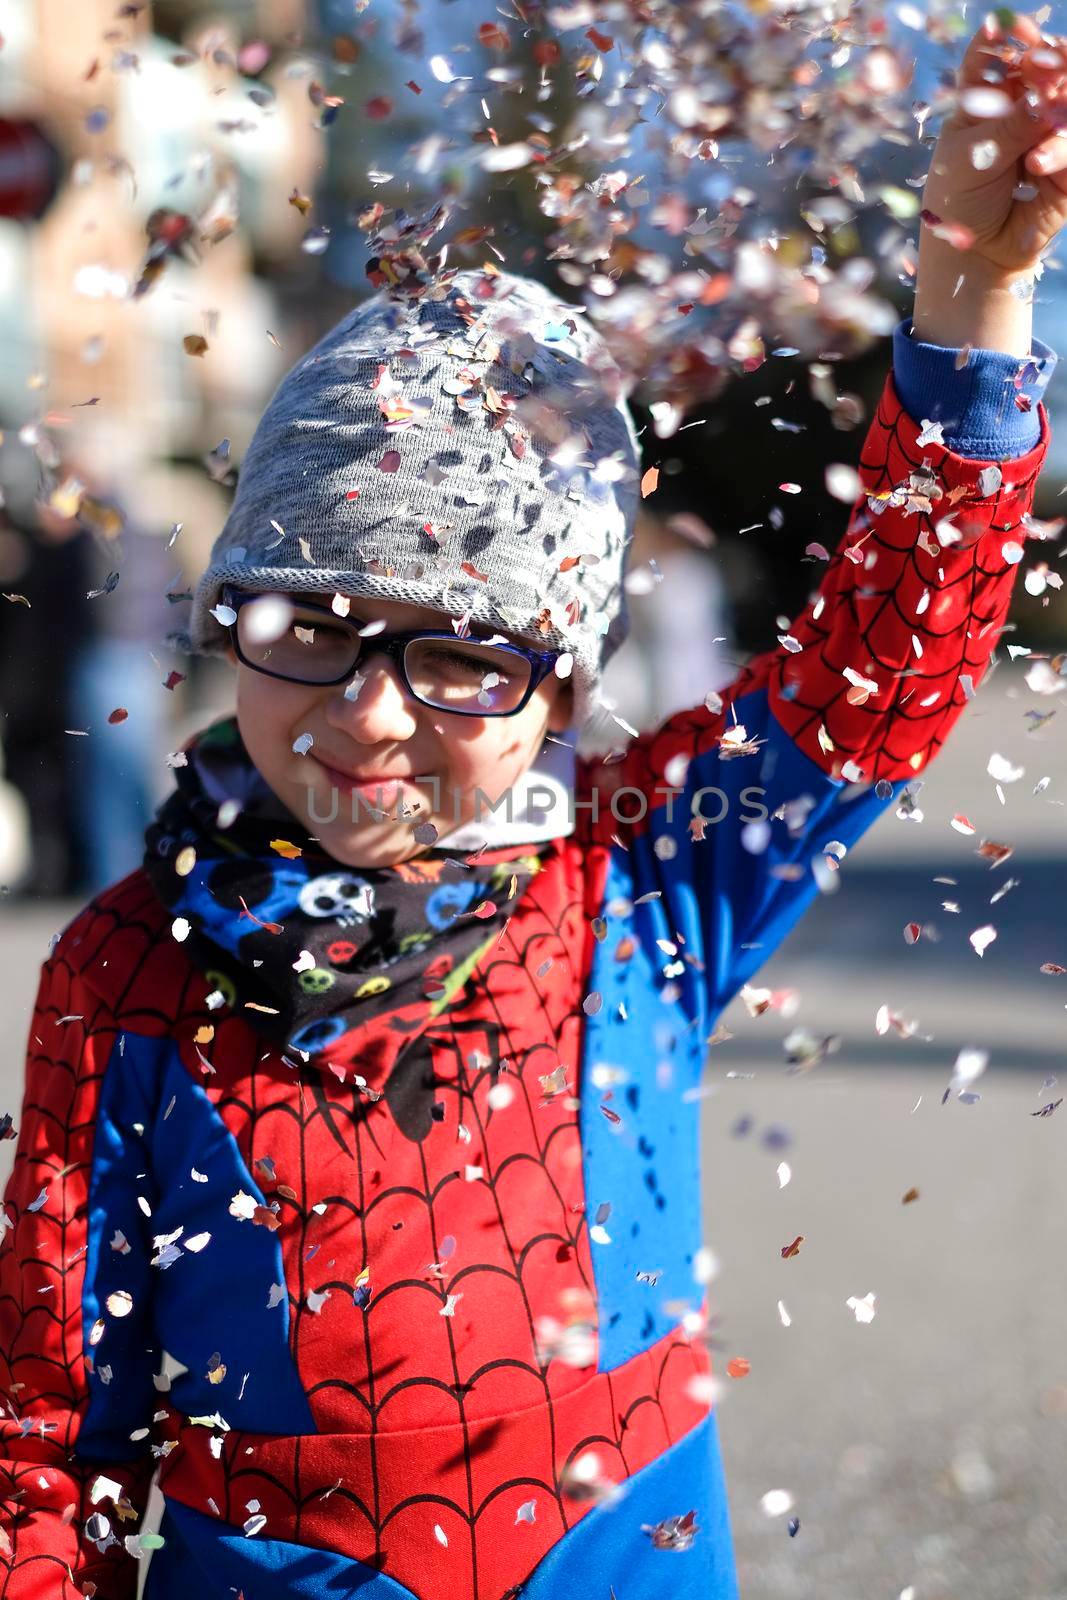 beautiful child with red spider superhero costume playing with confetti. High quality photo